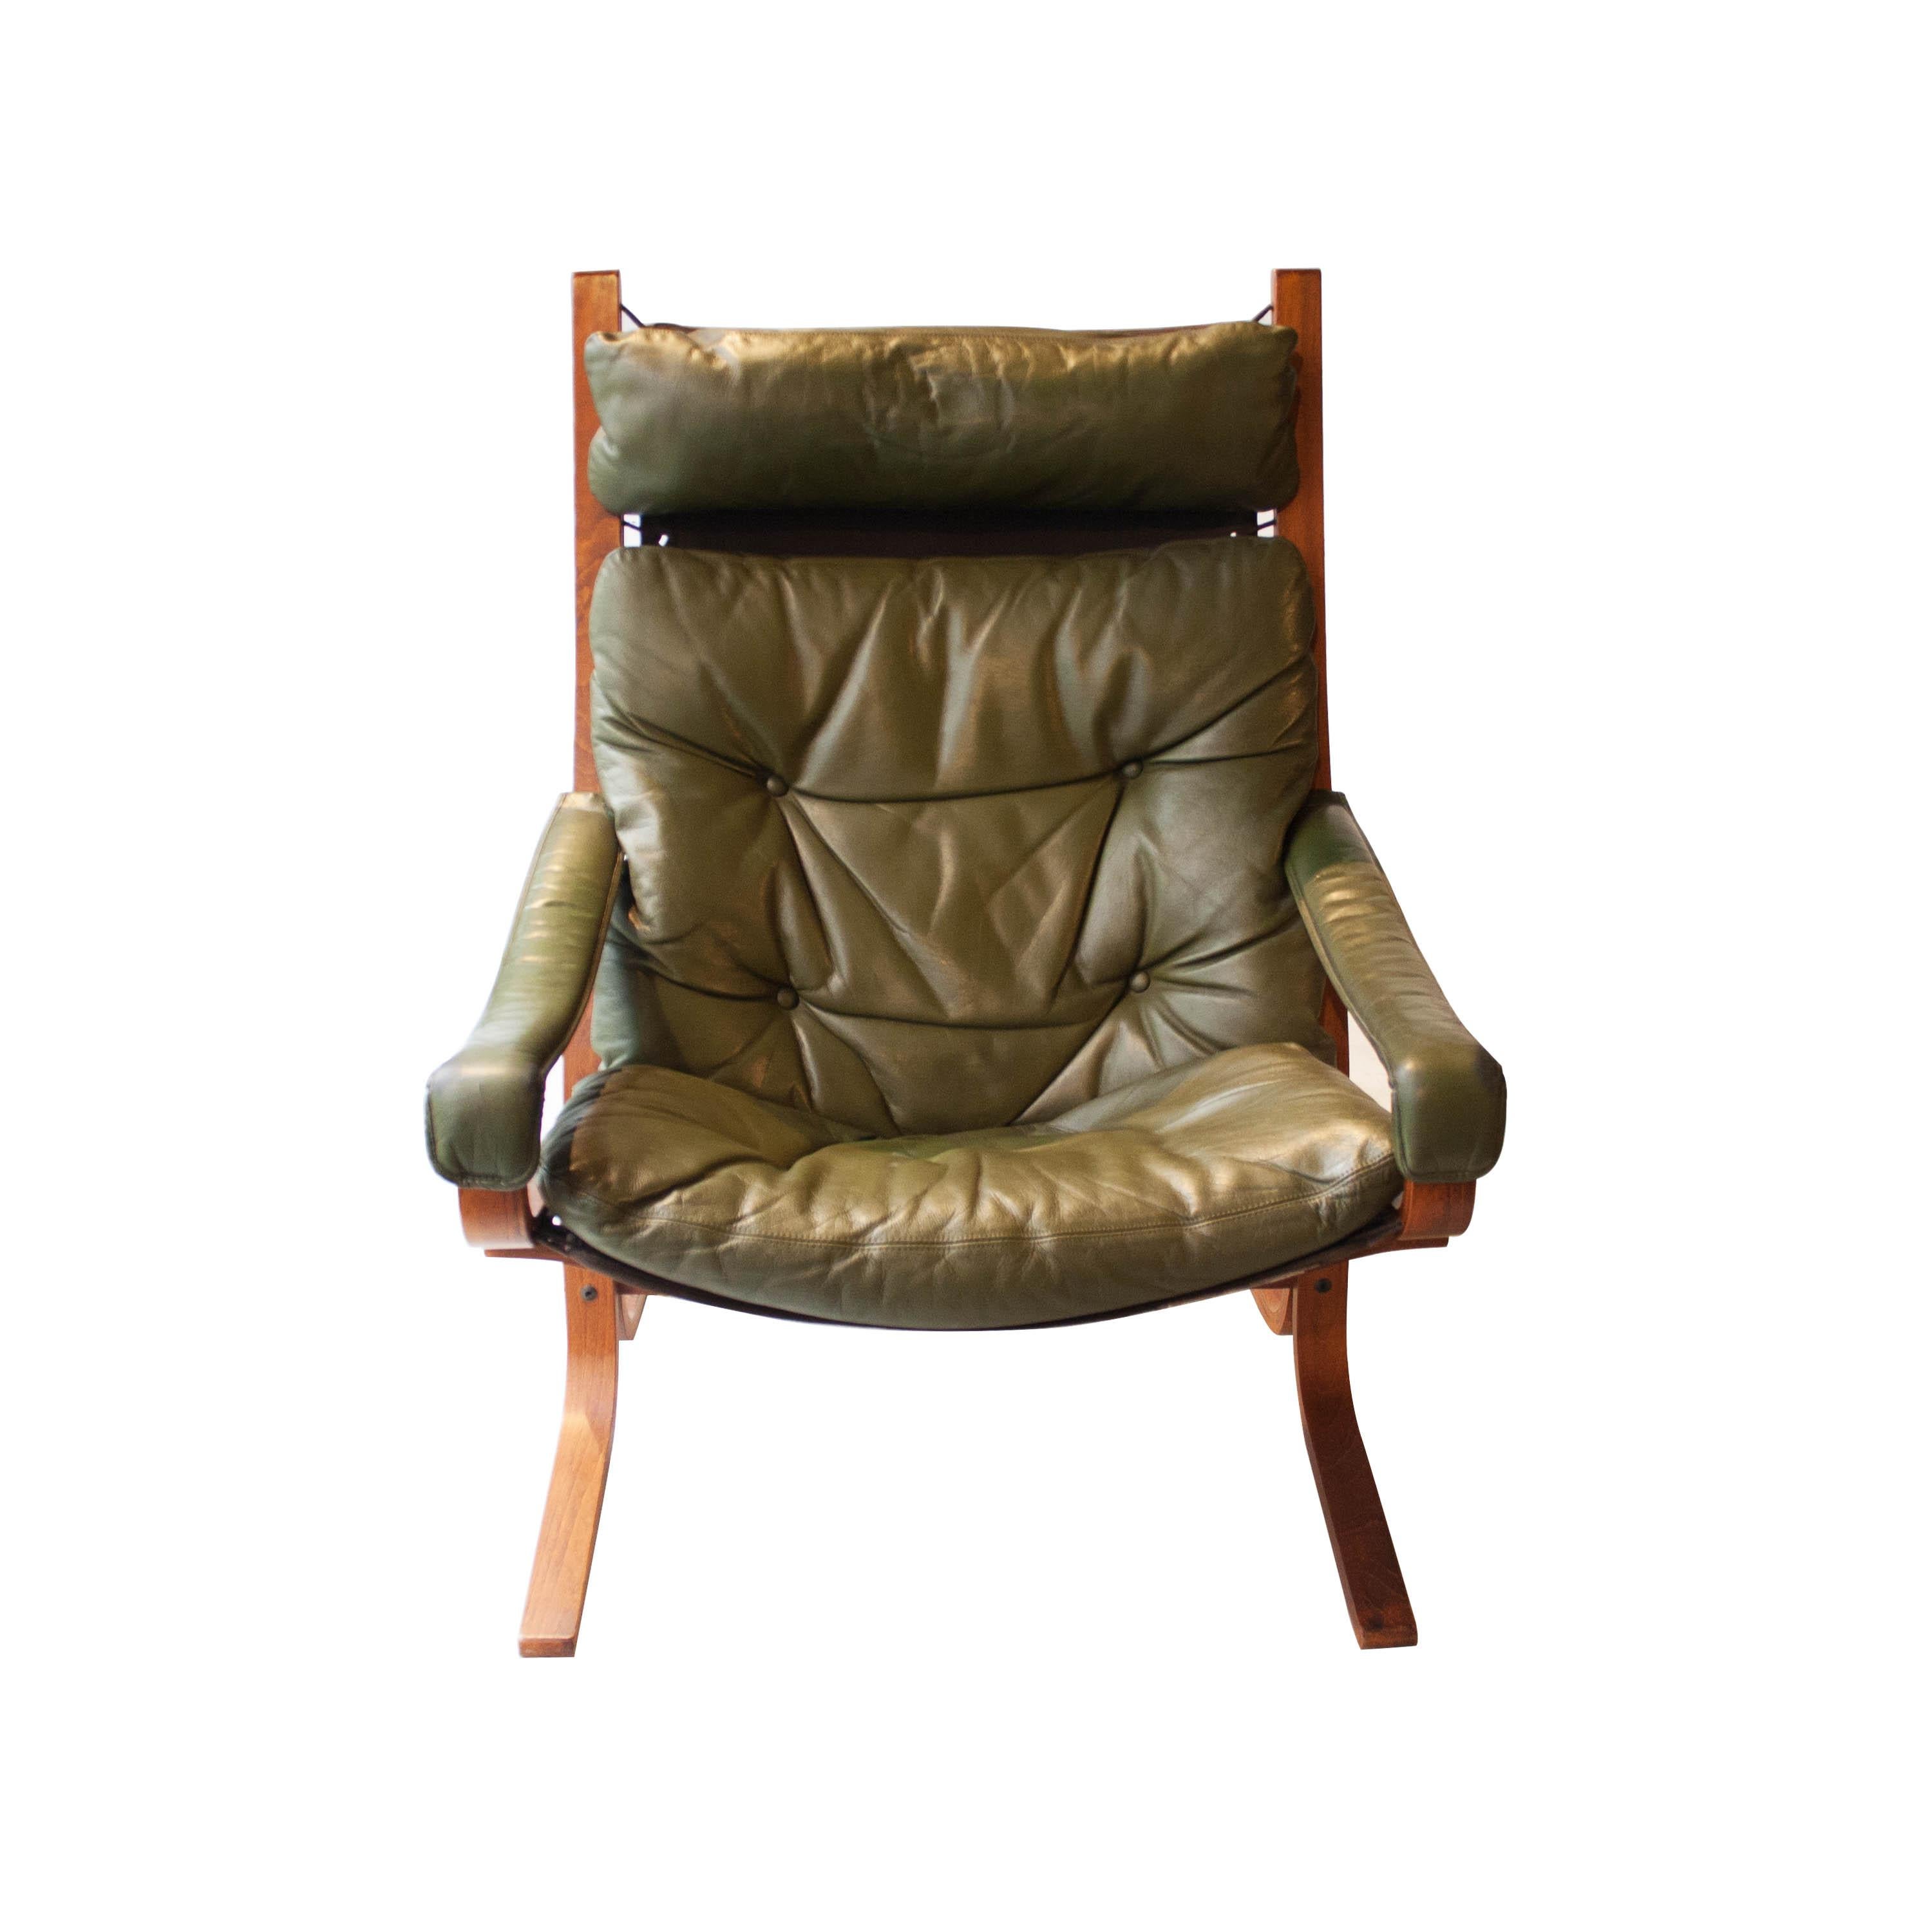 Armchair Siesta designed by Ingmar Relling in the 1960 in Norway. Structure in curved oak with headrest and armrests and upholstery in natural leather in olive color.
 